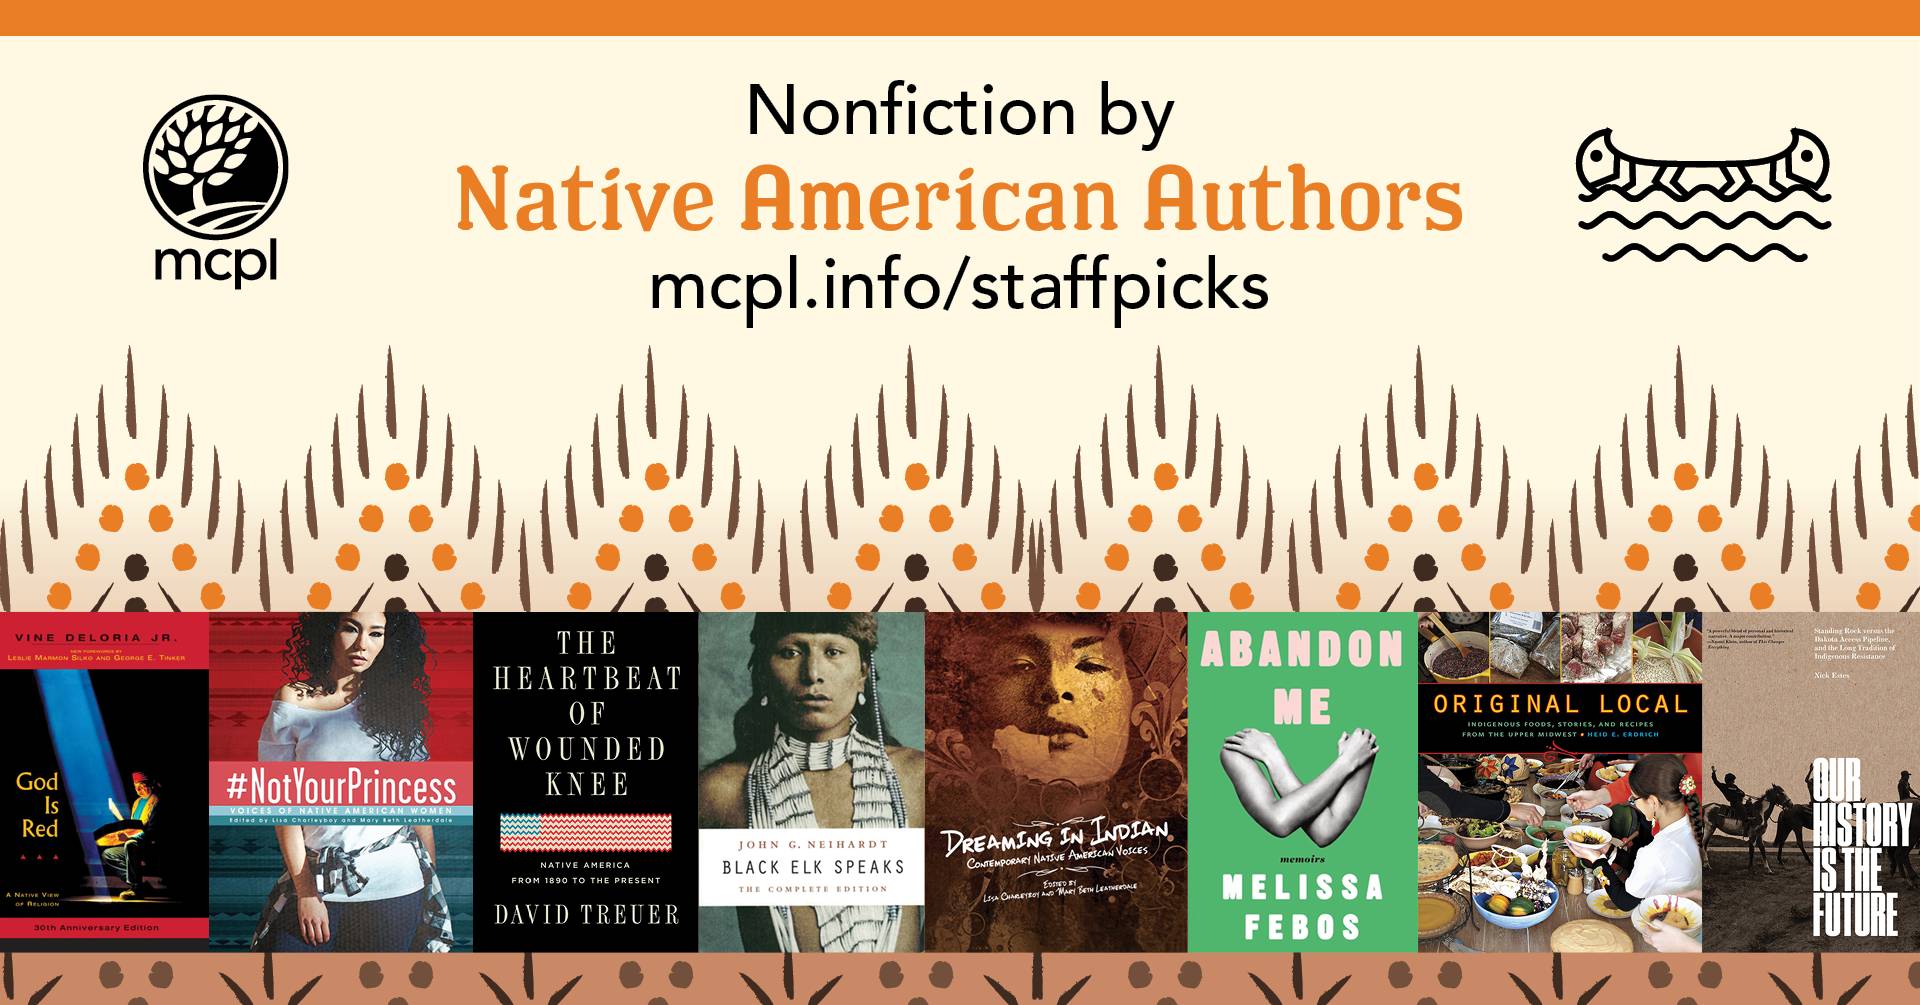 Nonfiction by Native American Authors